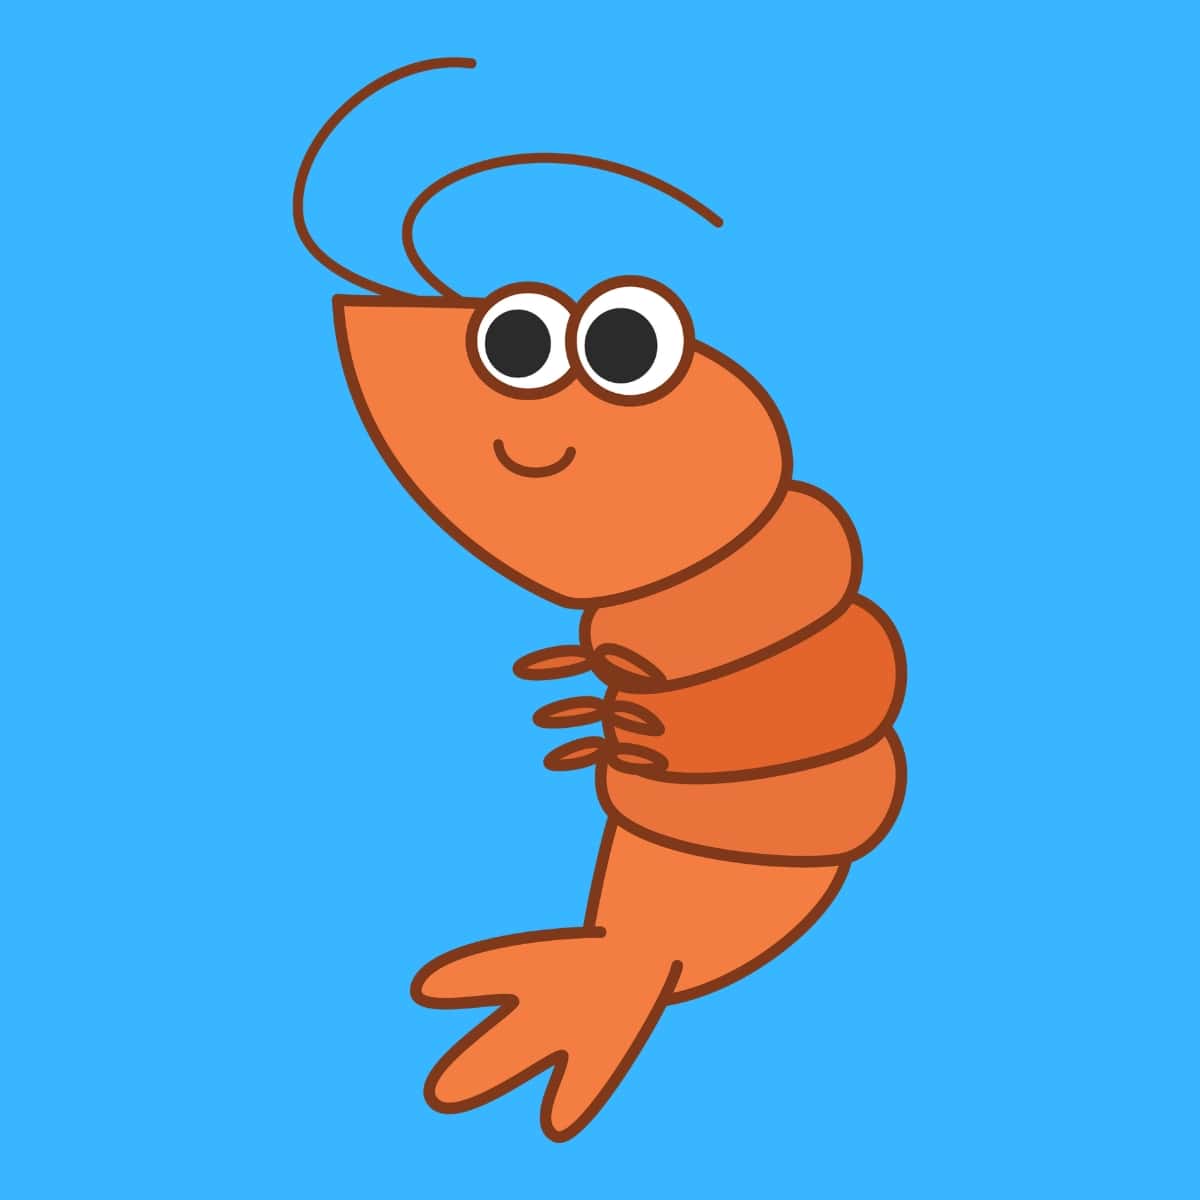 Cartoon graphic of a cute smiling shrimp on a blue background.